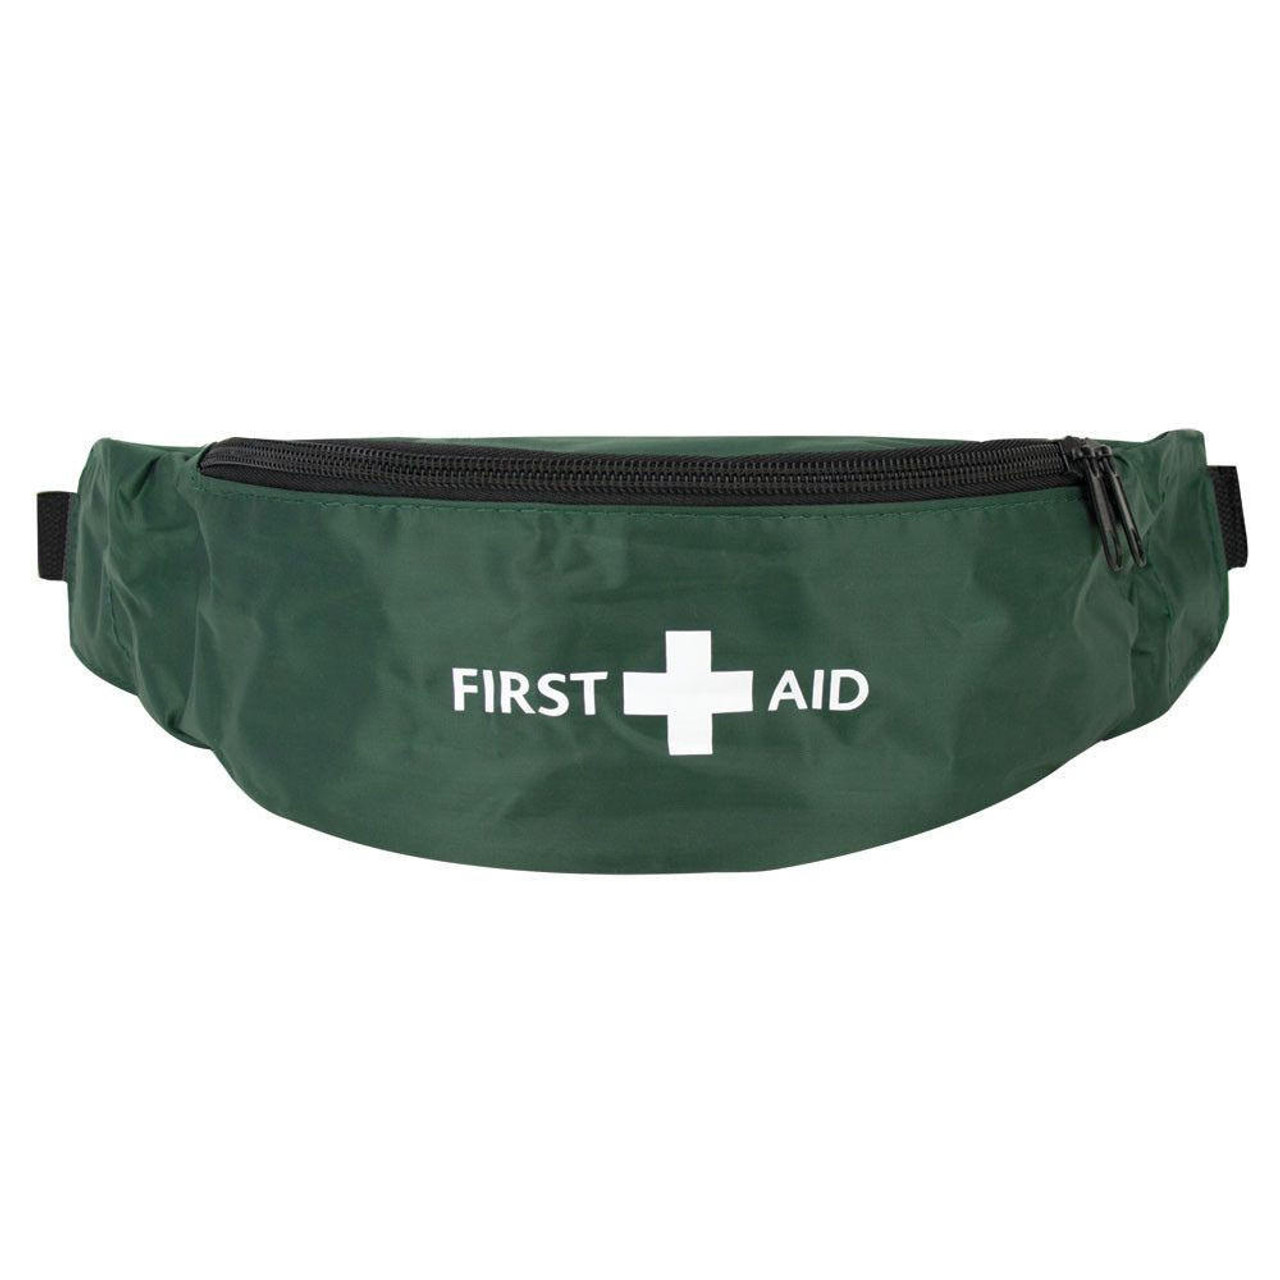 Zafety Personal Issue First Aid Kit for Lone Workers in Bum Bag BS8599 Compliant 